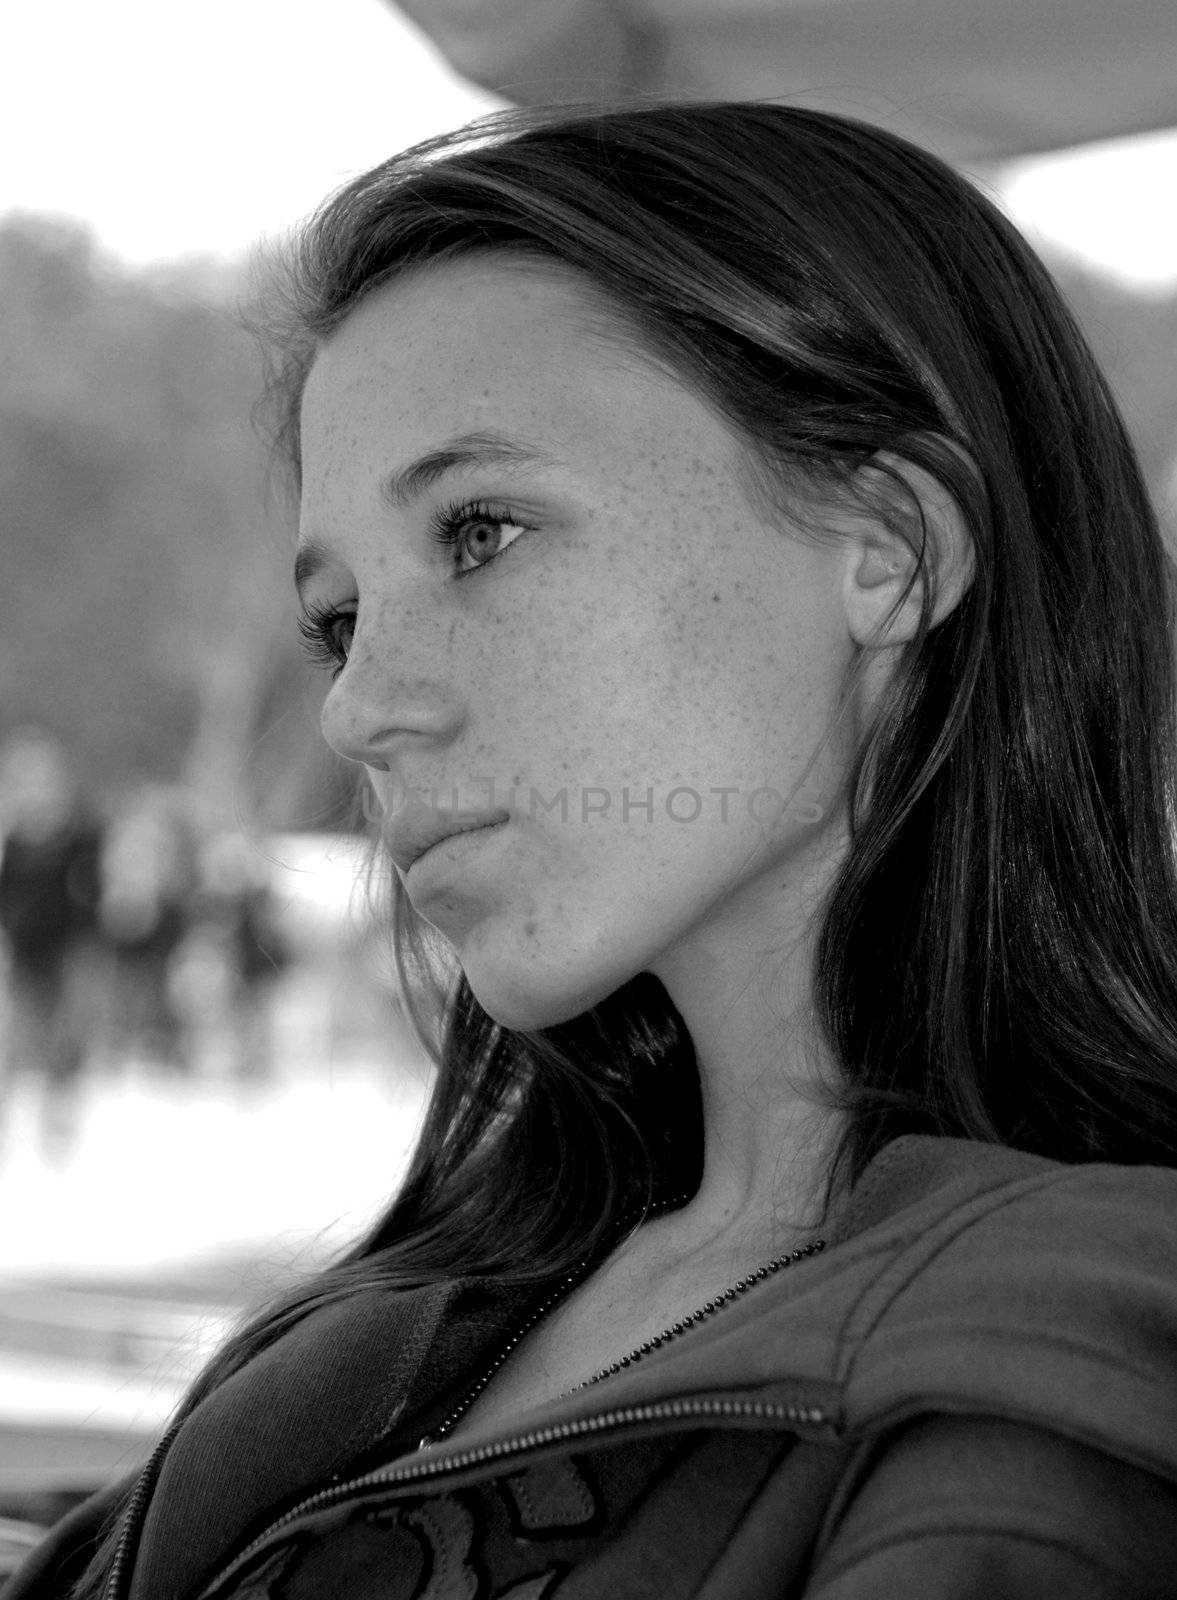 young teenager pensive in black and white
